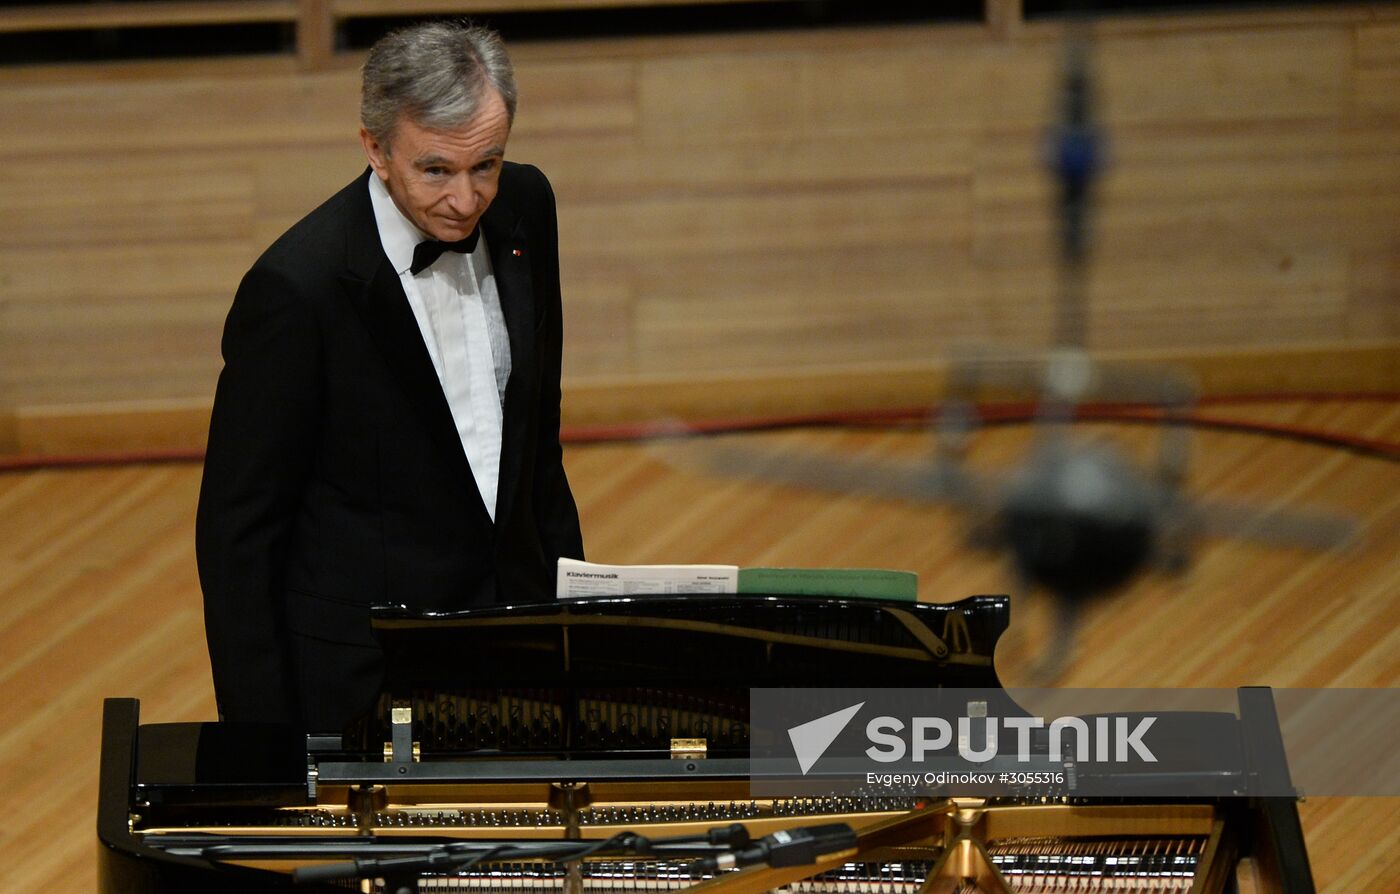 Bernard Arnault takes part in All Time Masterpieces concert